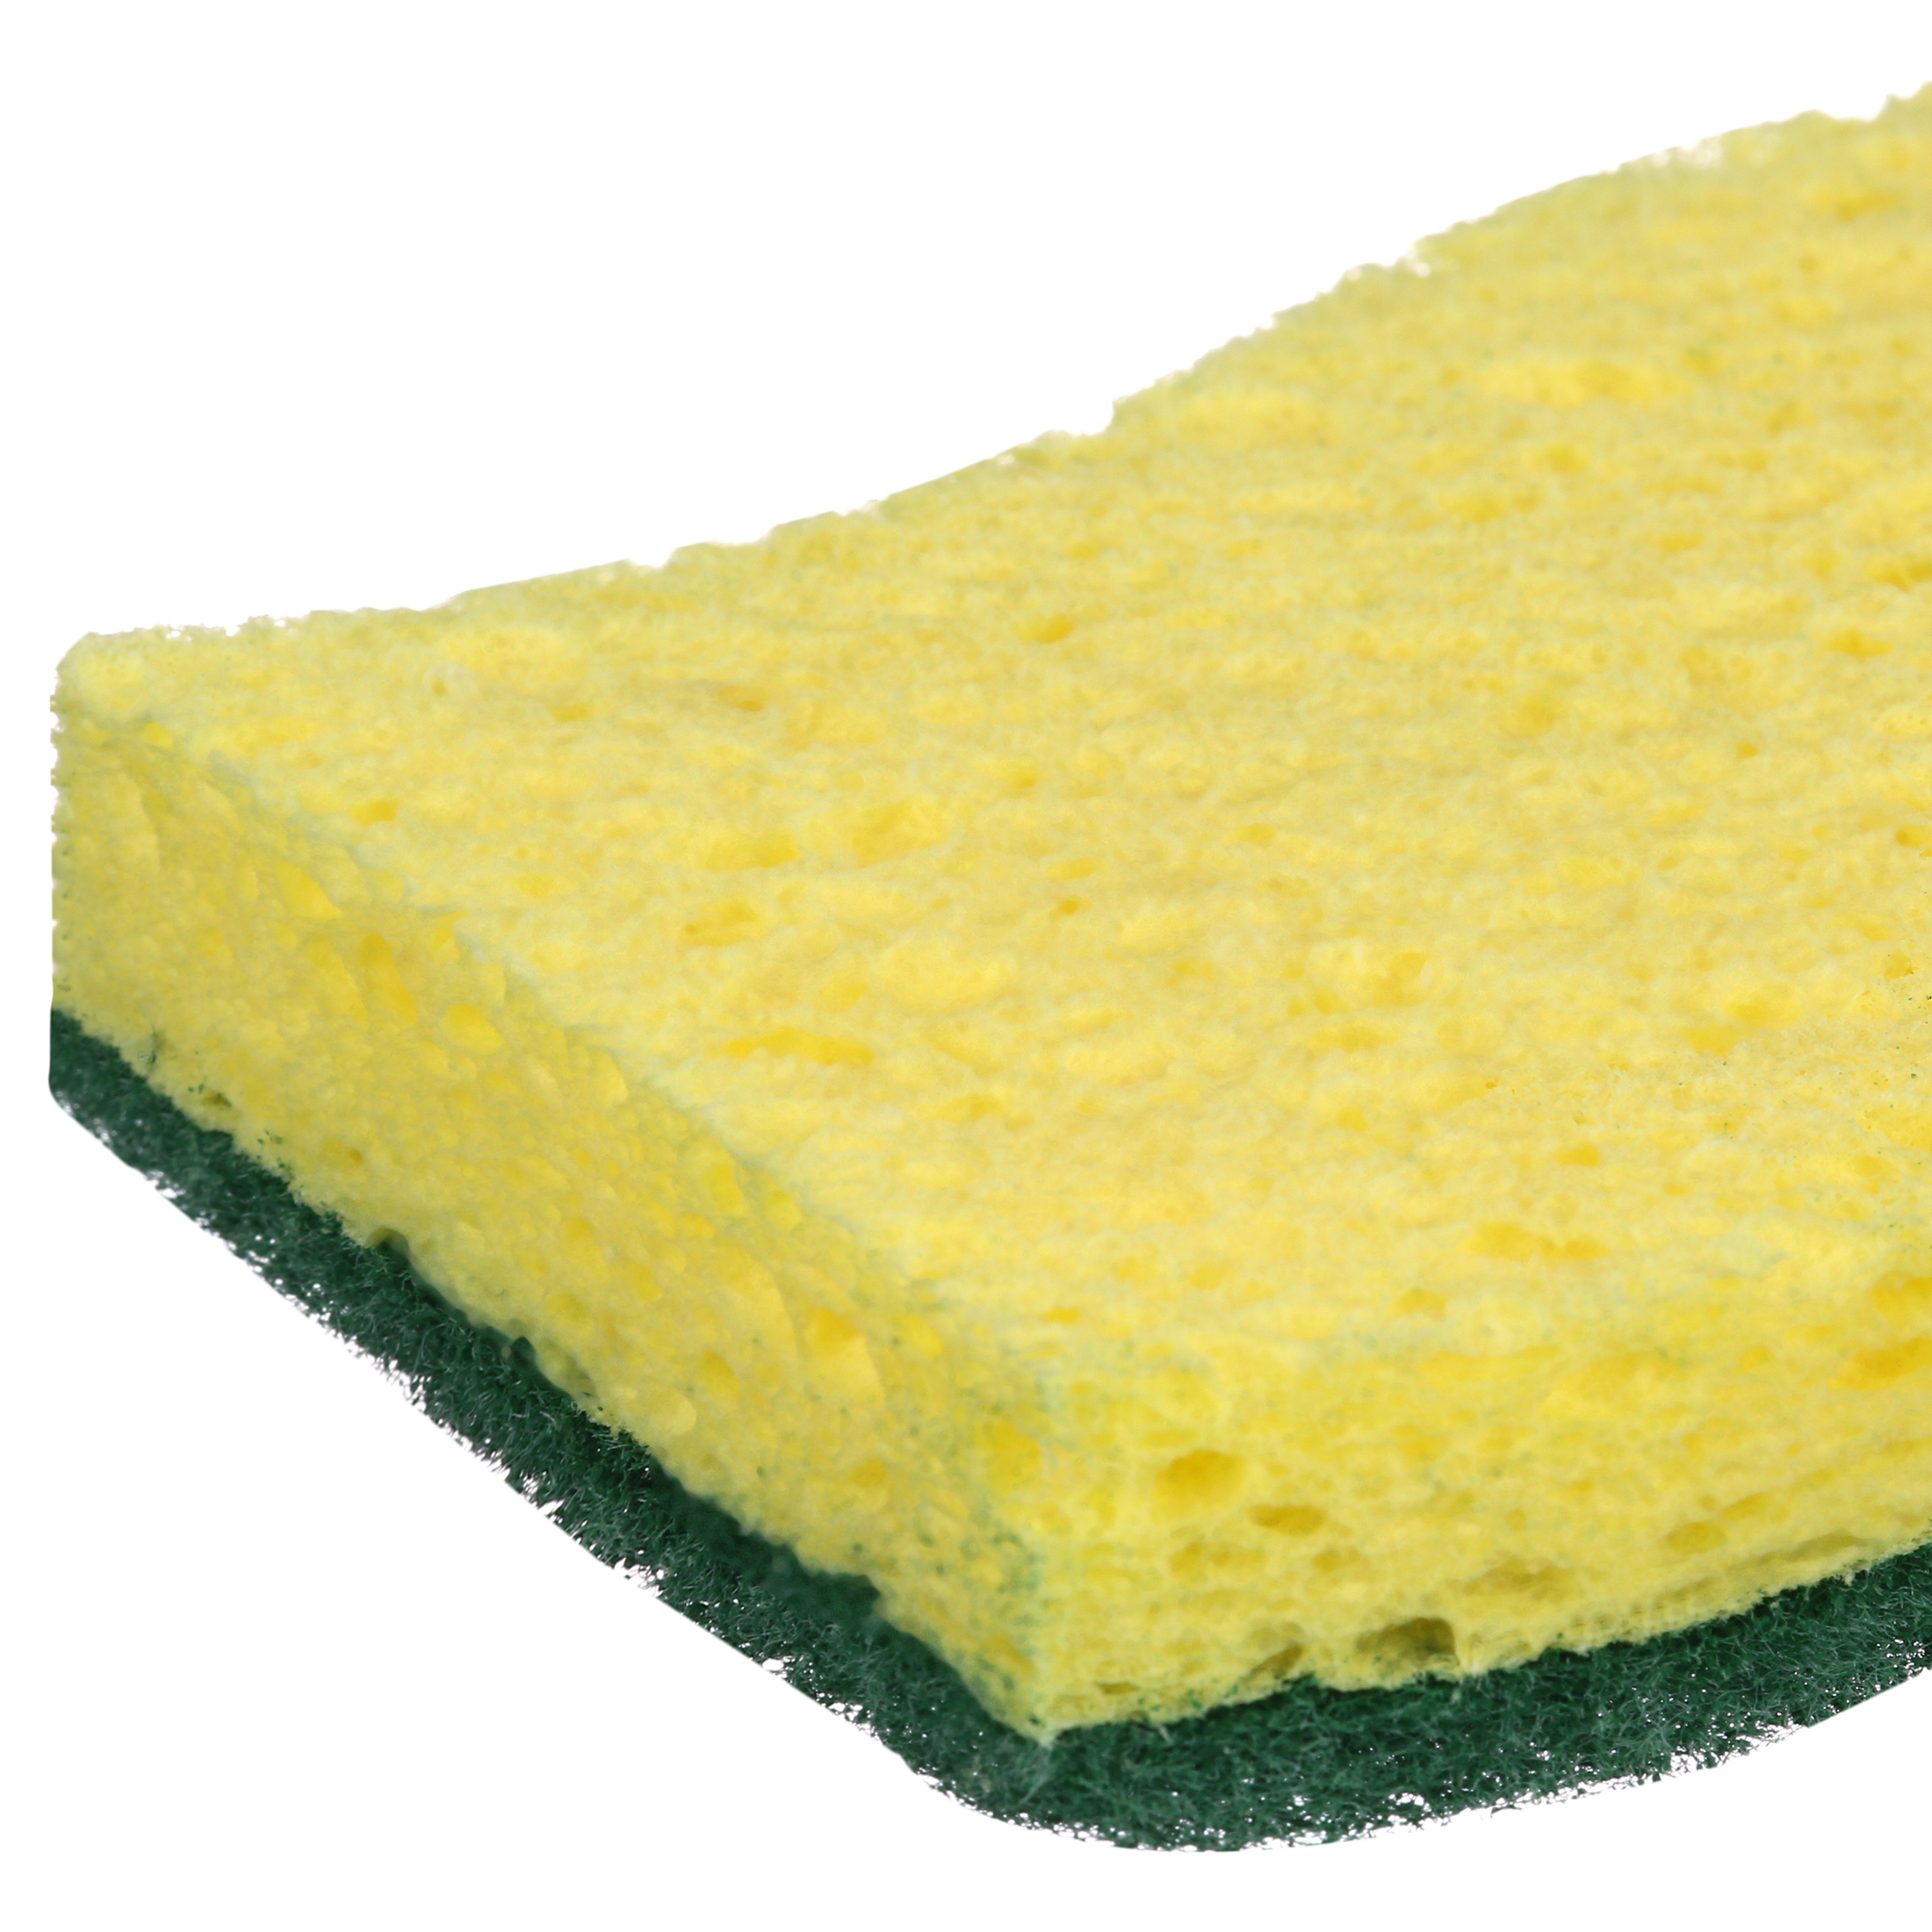 Great Value Heavy Duty Scrub Sponges, 4 Count - image 4 of 6